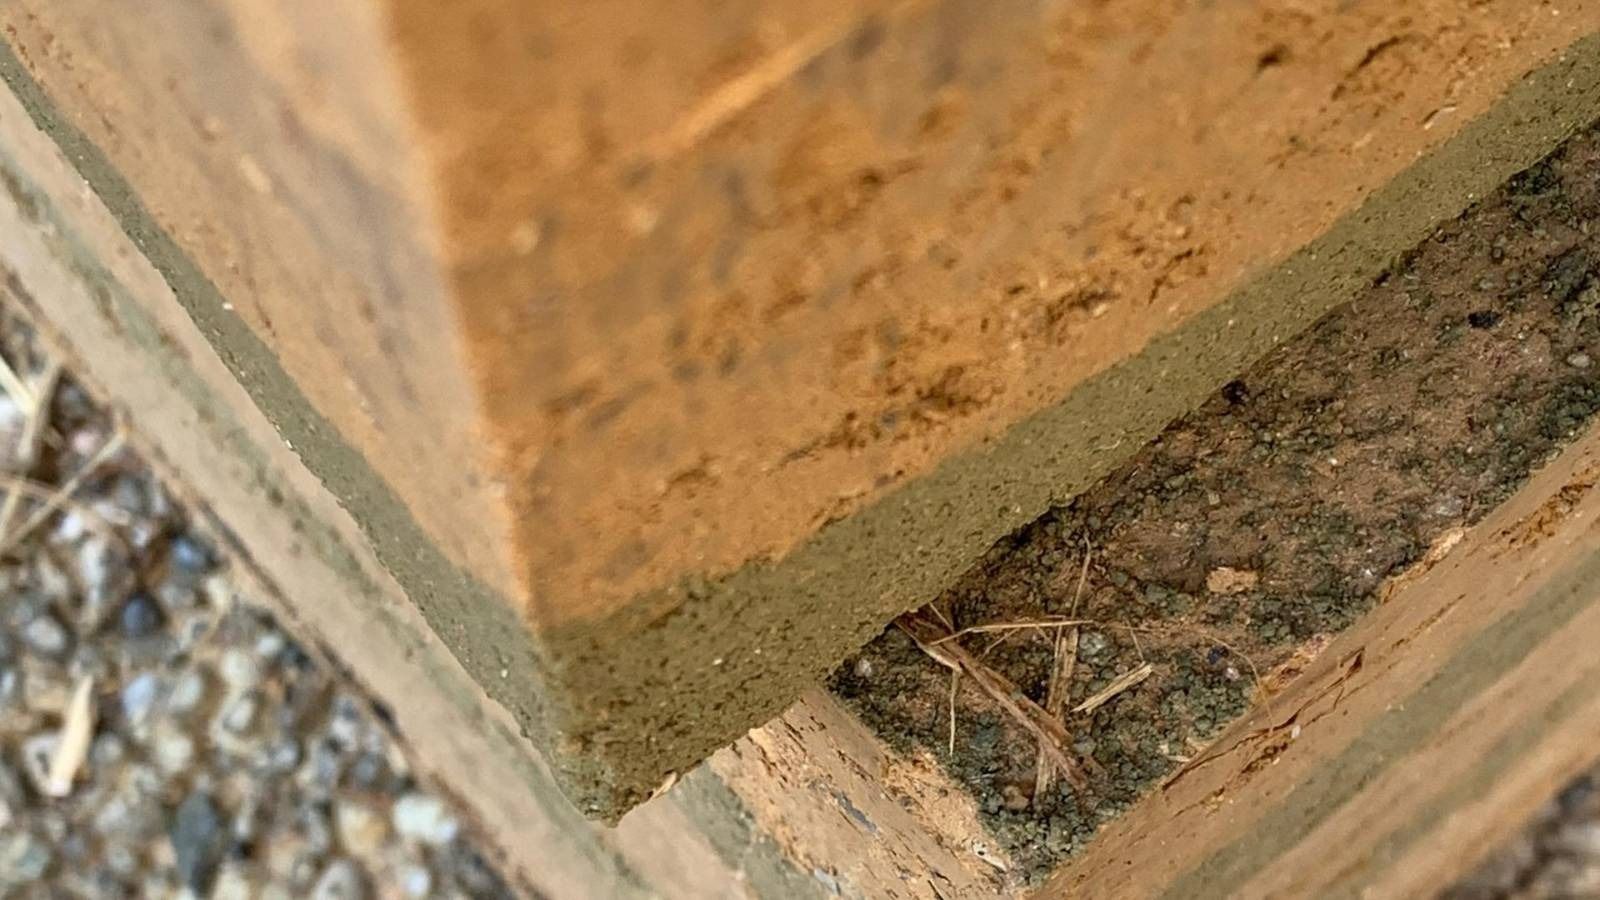 Zoomed in perspective on clay bricks. The different layers of compressed soil are visible in their different shades of brown.